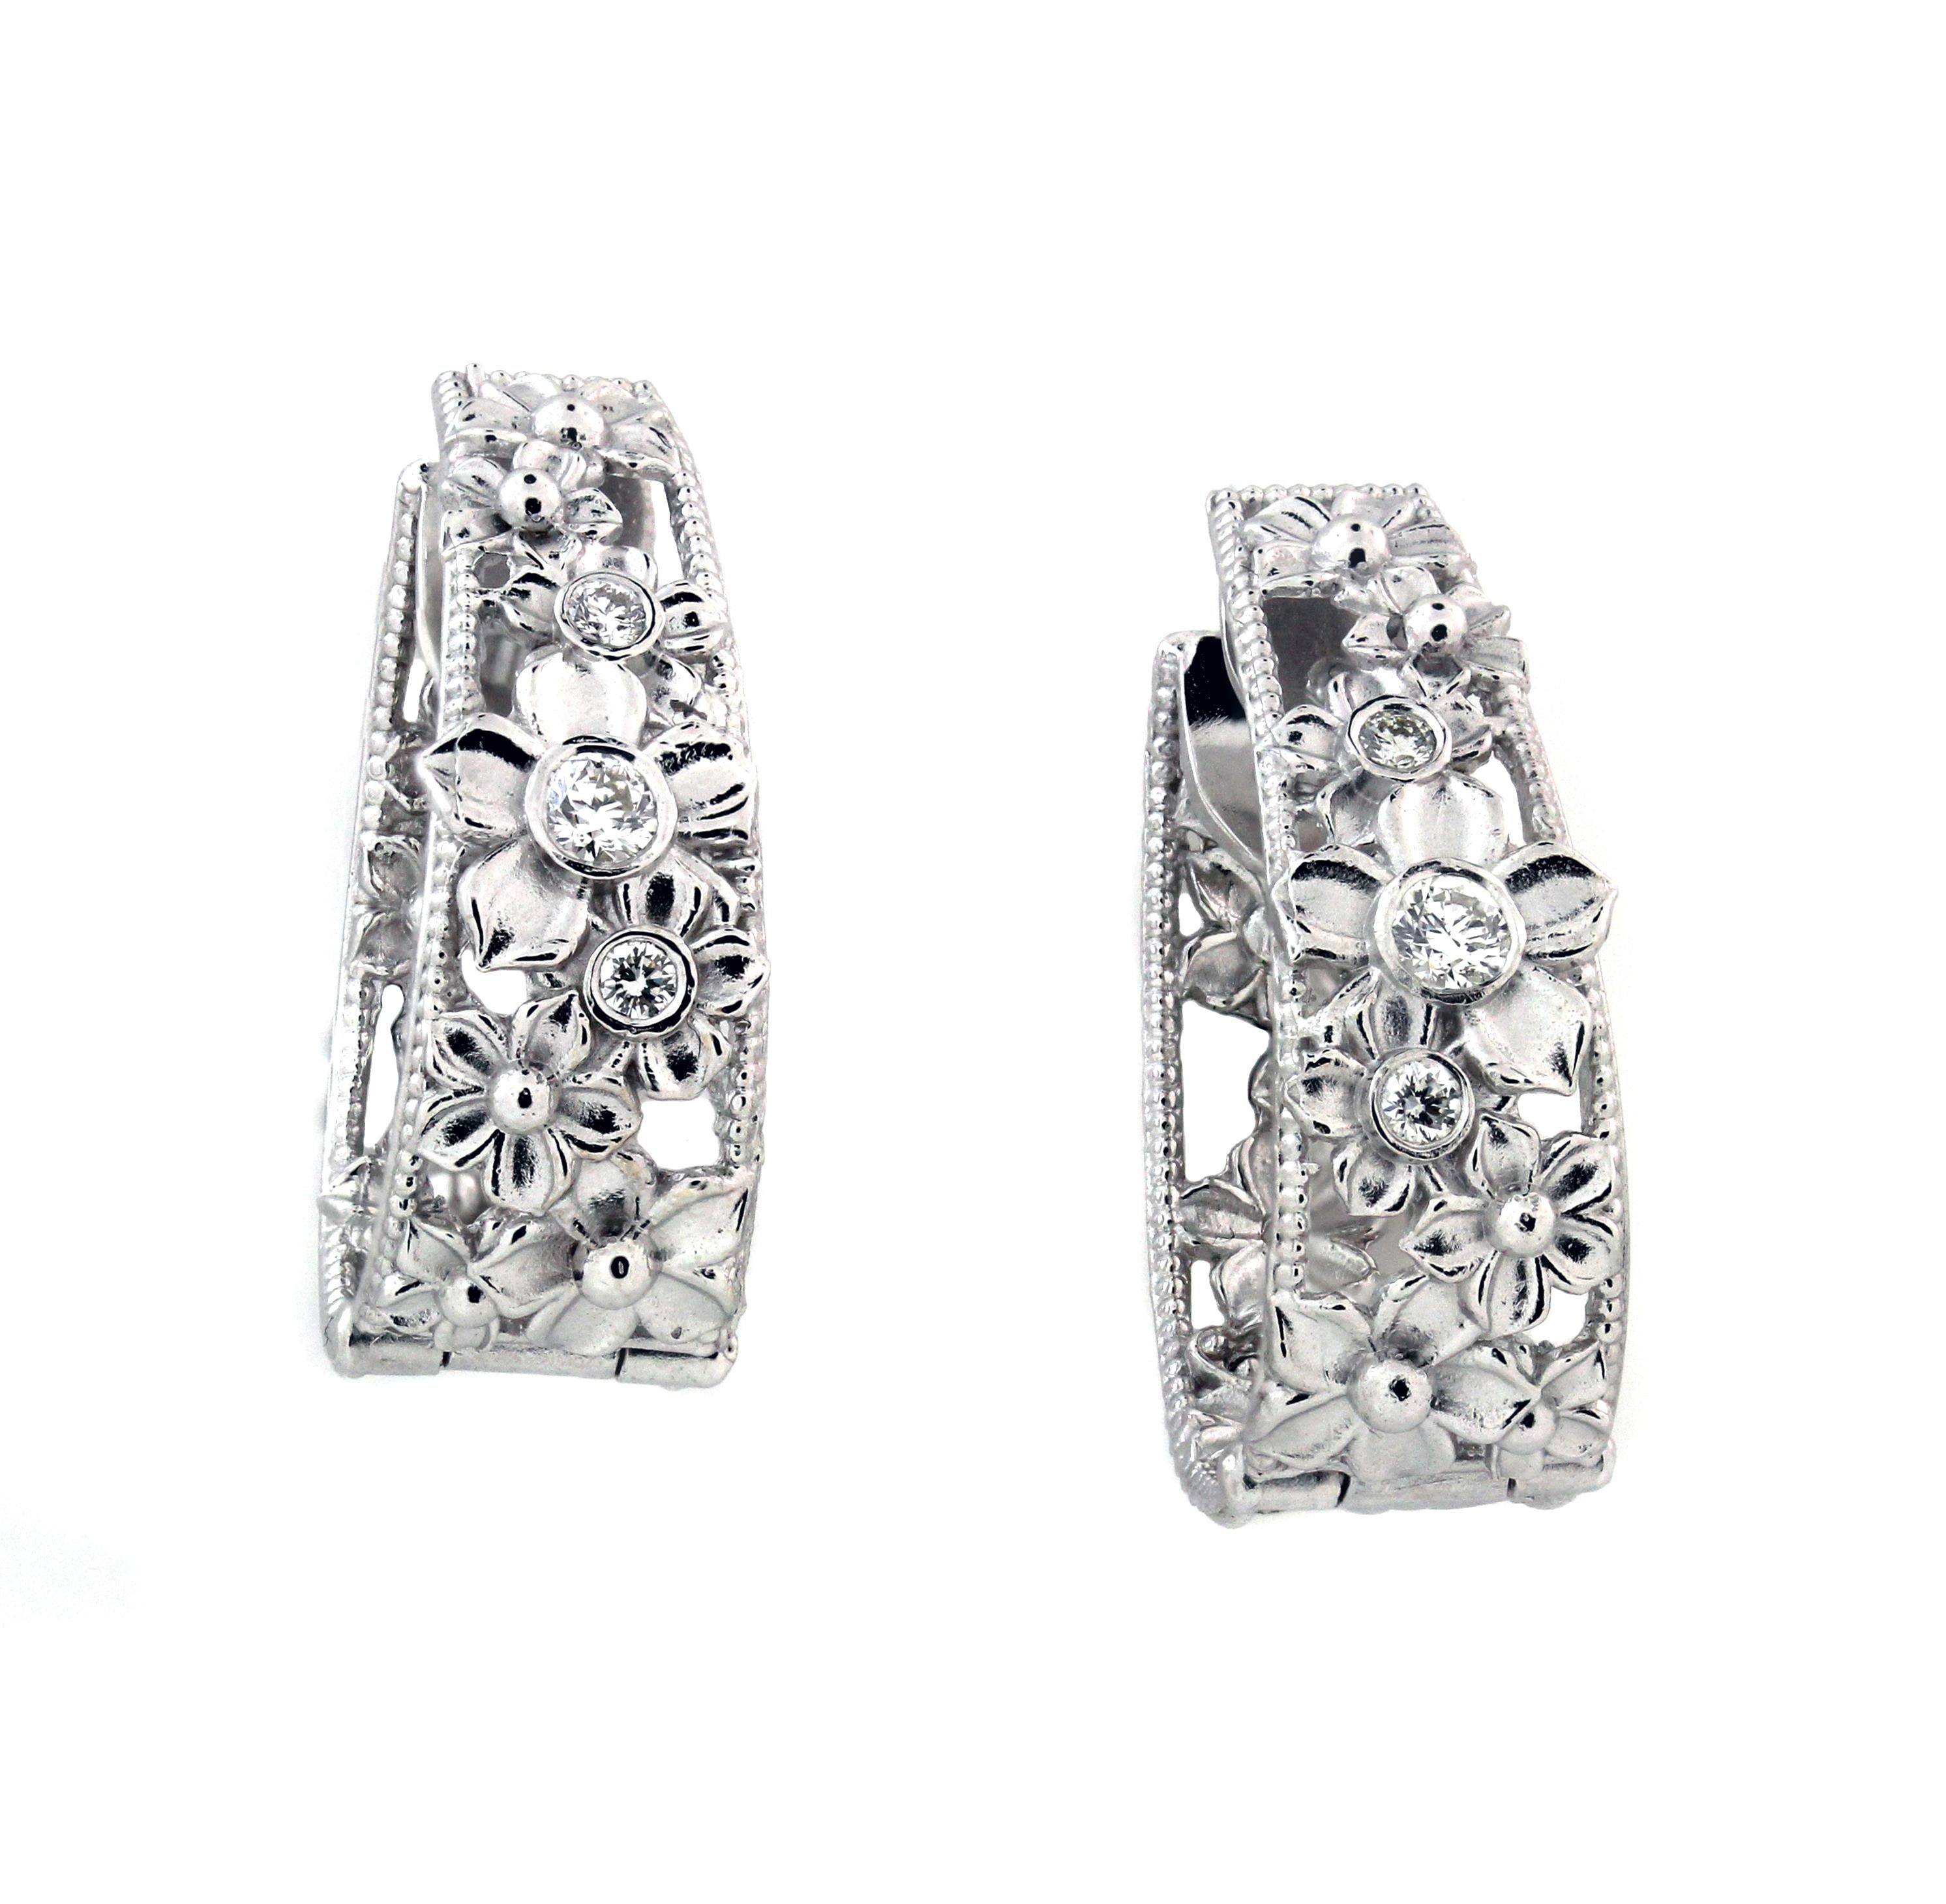 18K White Gold and Diamond Floral Hoop Earrings by Stambolian

These are inside-out earrings with diamonds set on face of earrings and floral design continuing on the interior.

0.34ct. G color, VS clarity diamonds. 6 total stones.

Earrings are 1